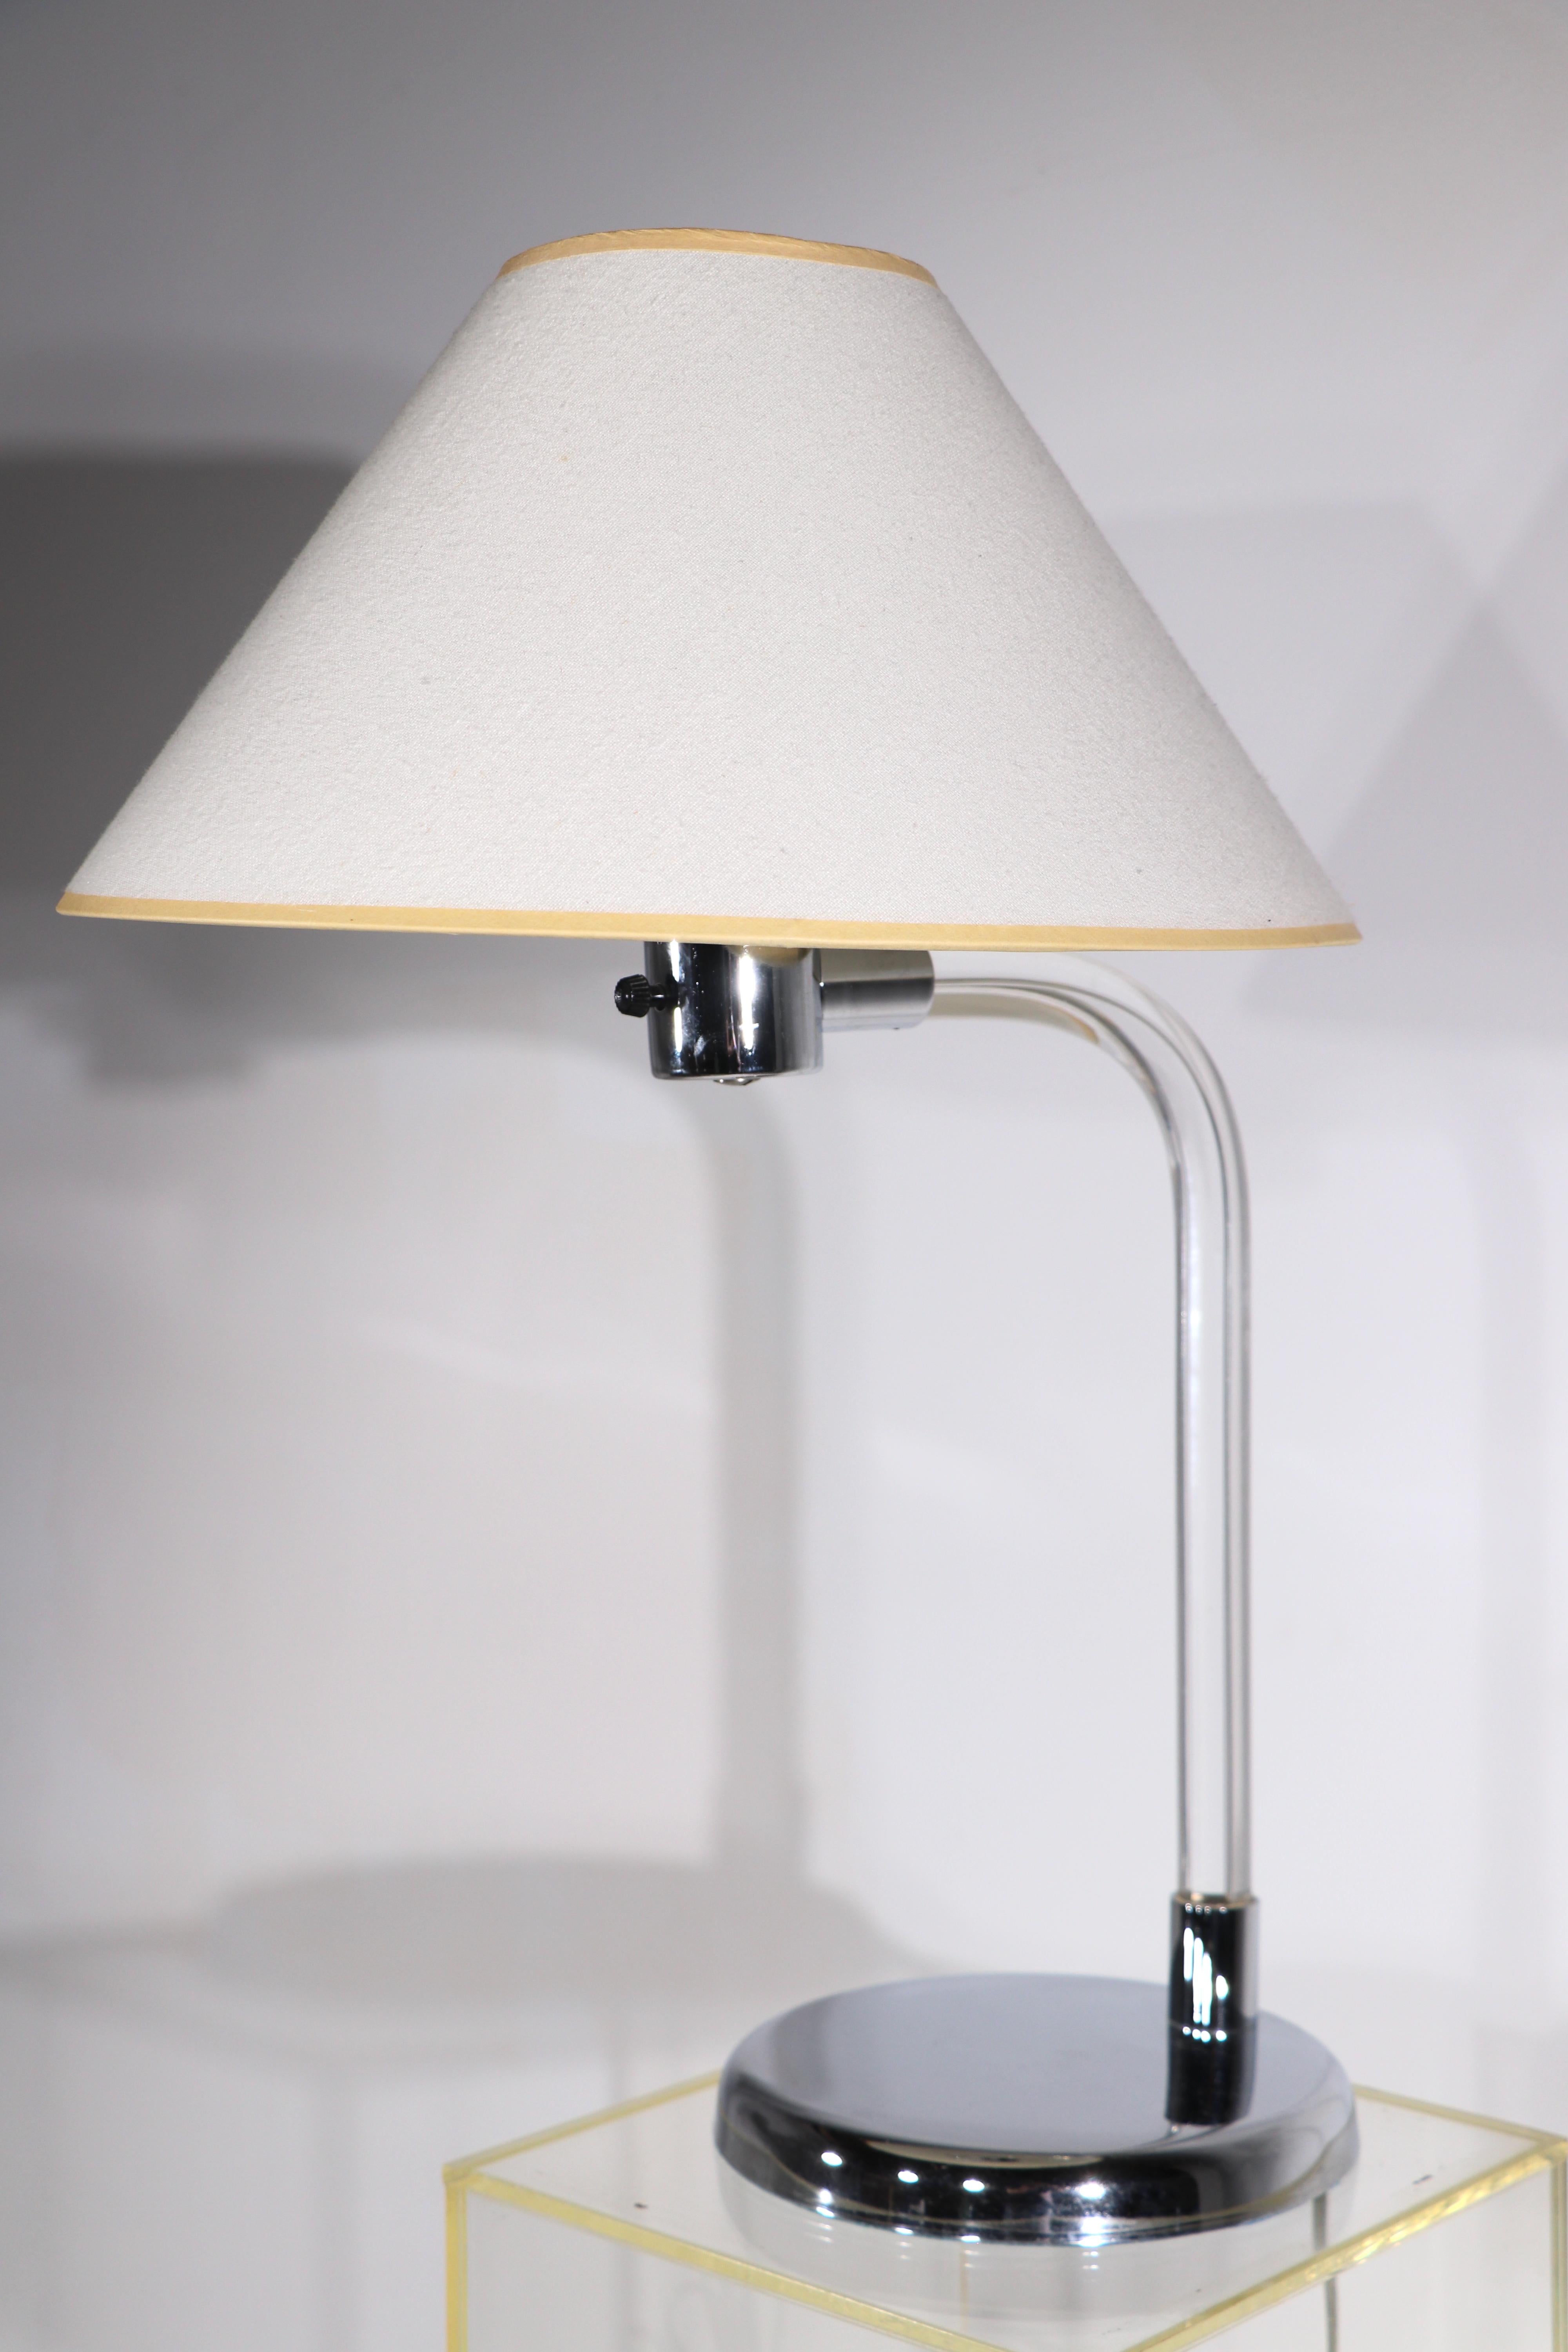 American Pr. Lucite and Chrome Desk Lamps Crylicord by Peter Hamburger for Kovacs